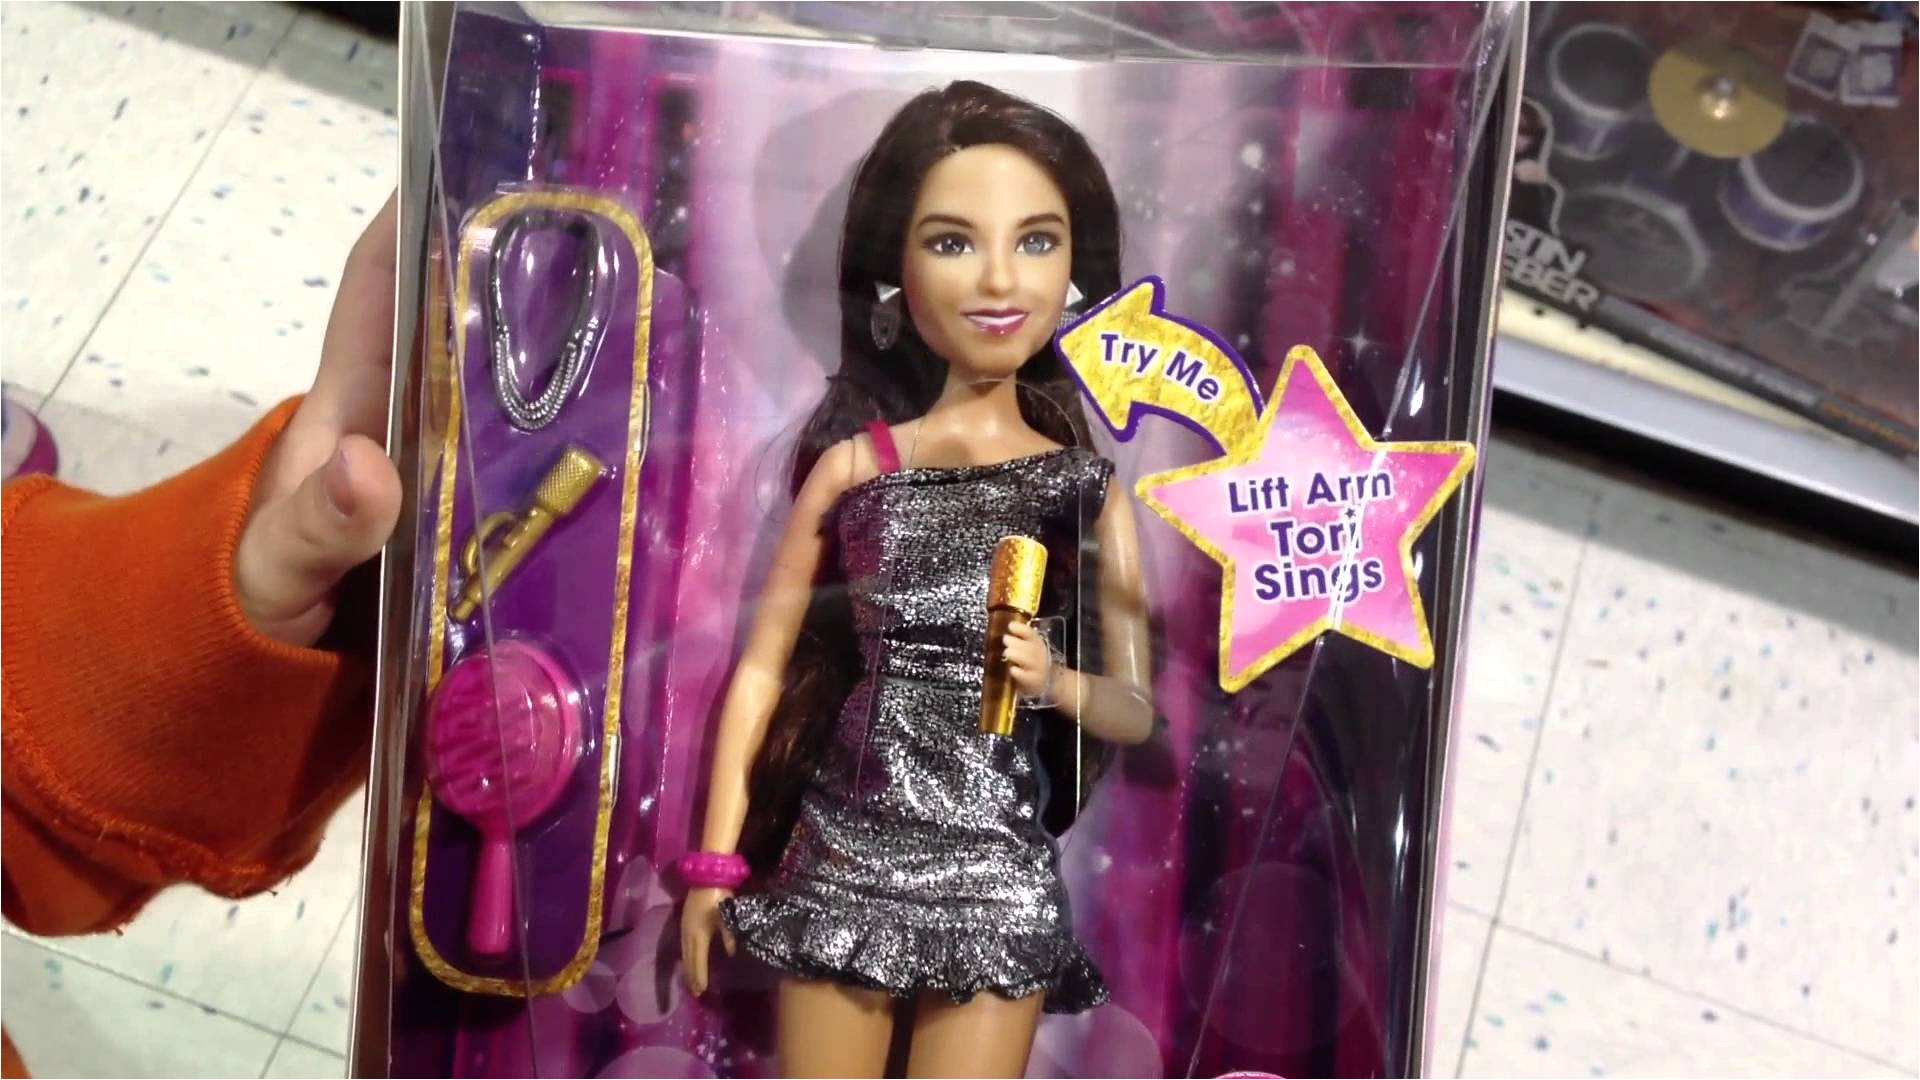 Victorious Locker Decorator Kit Victoria Justice Victorious Microphone tori Doll the toy Spy Youtube